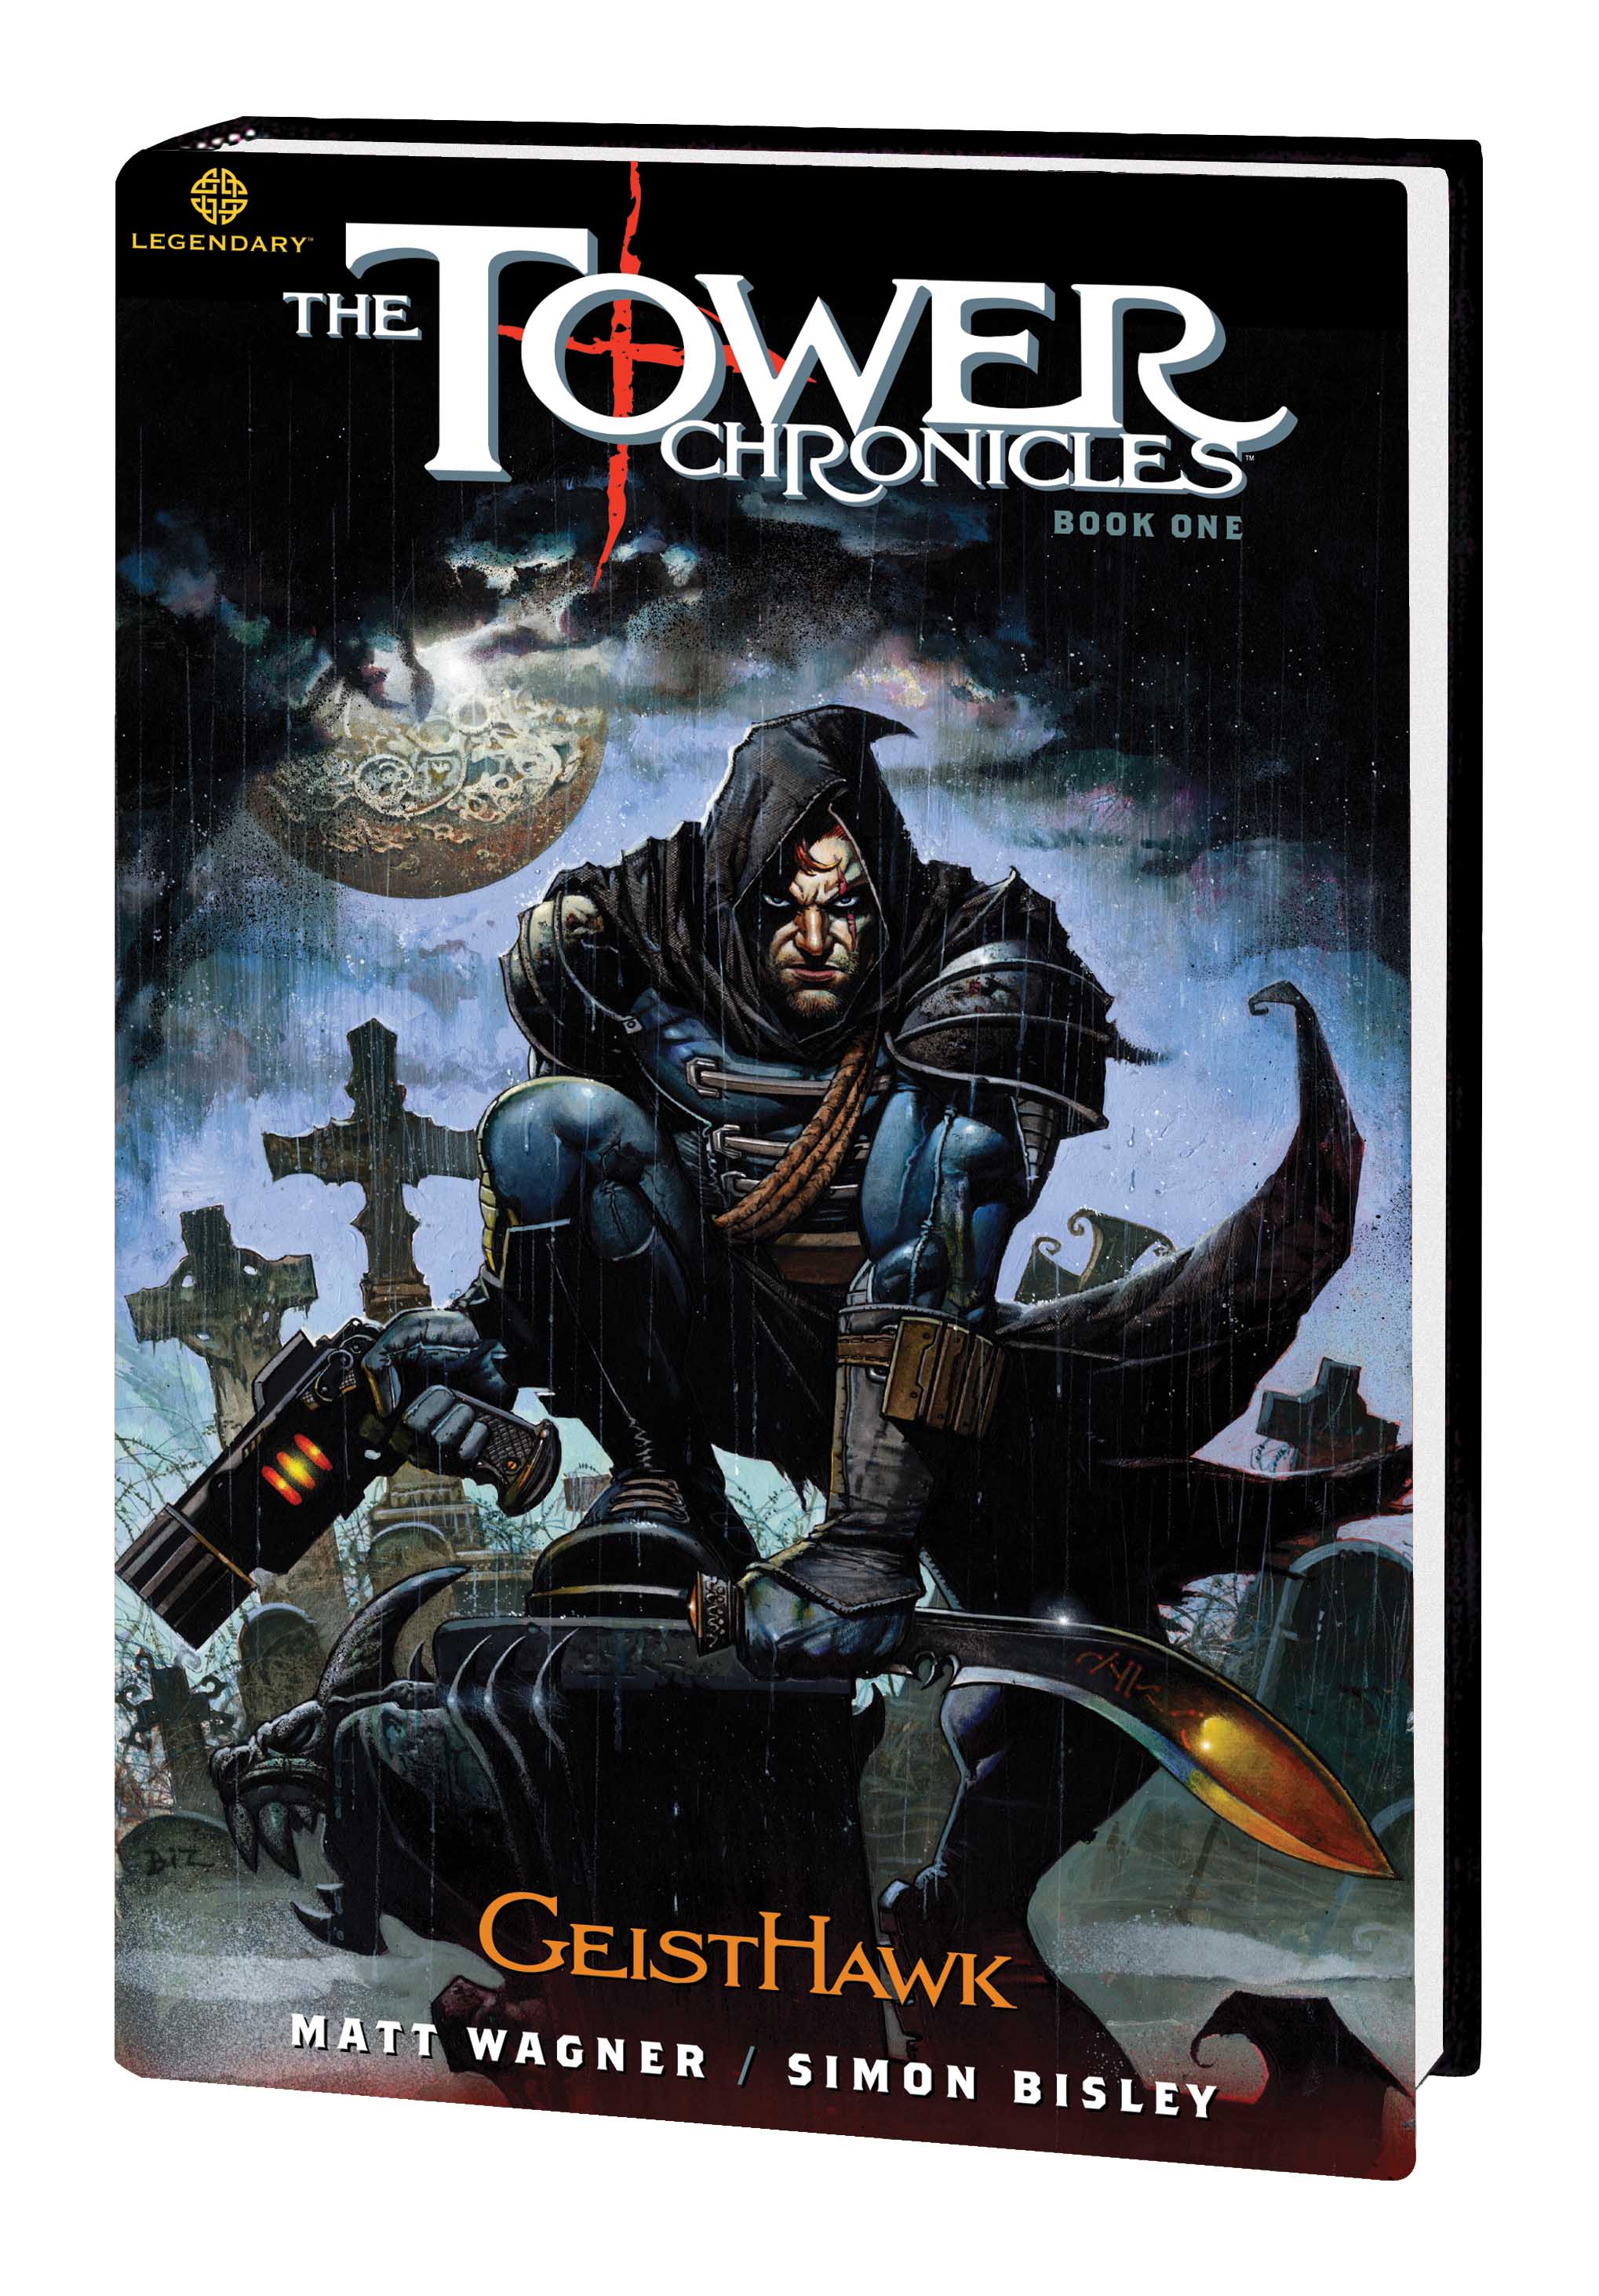 THE TOWER CHRONICLES BOOK ONE: GEISTHAWK PREMIERE HC (Hardcover)